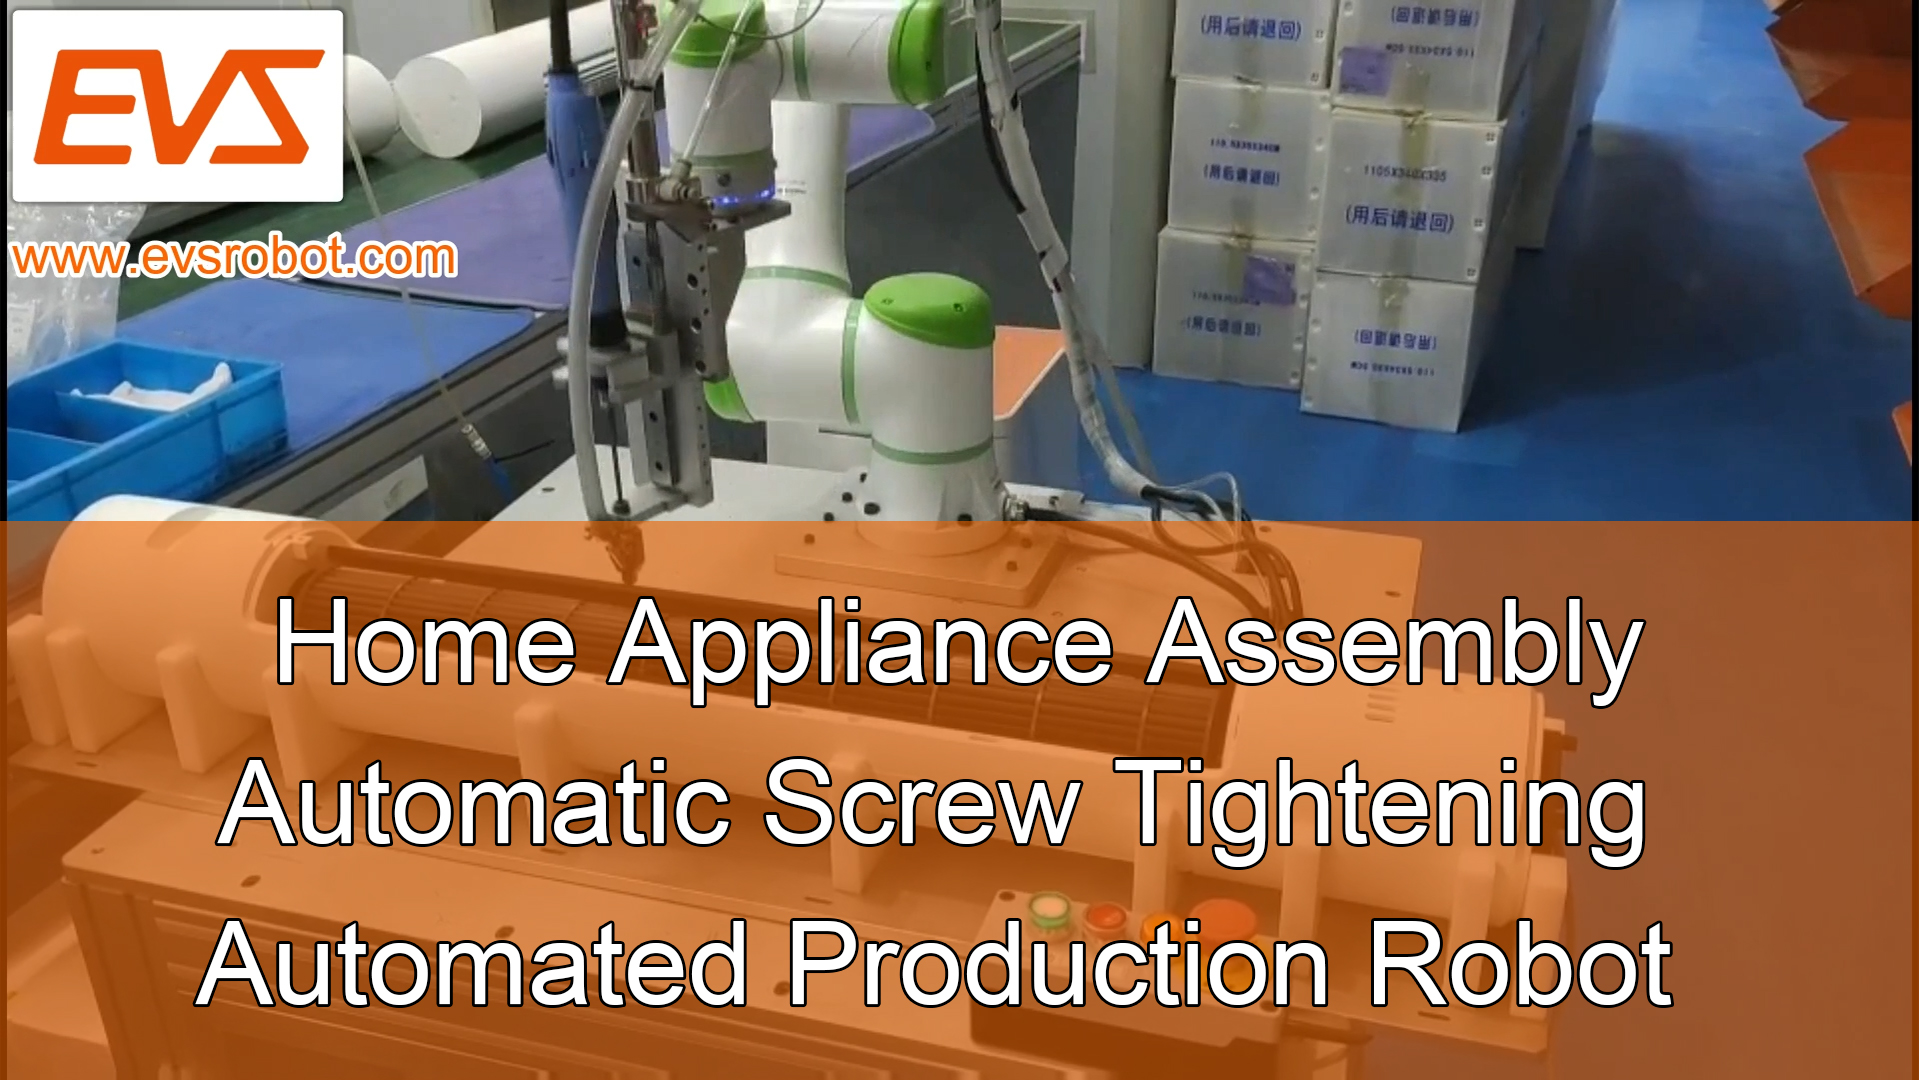 Home Appliance Assembly| Automatic Screw Tightening| Automated production Robot